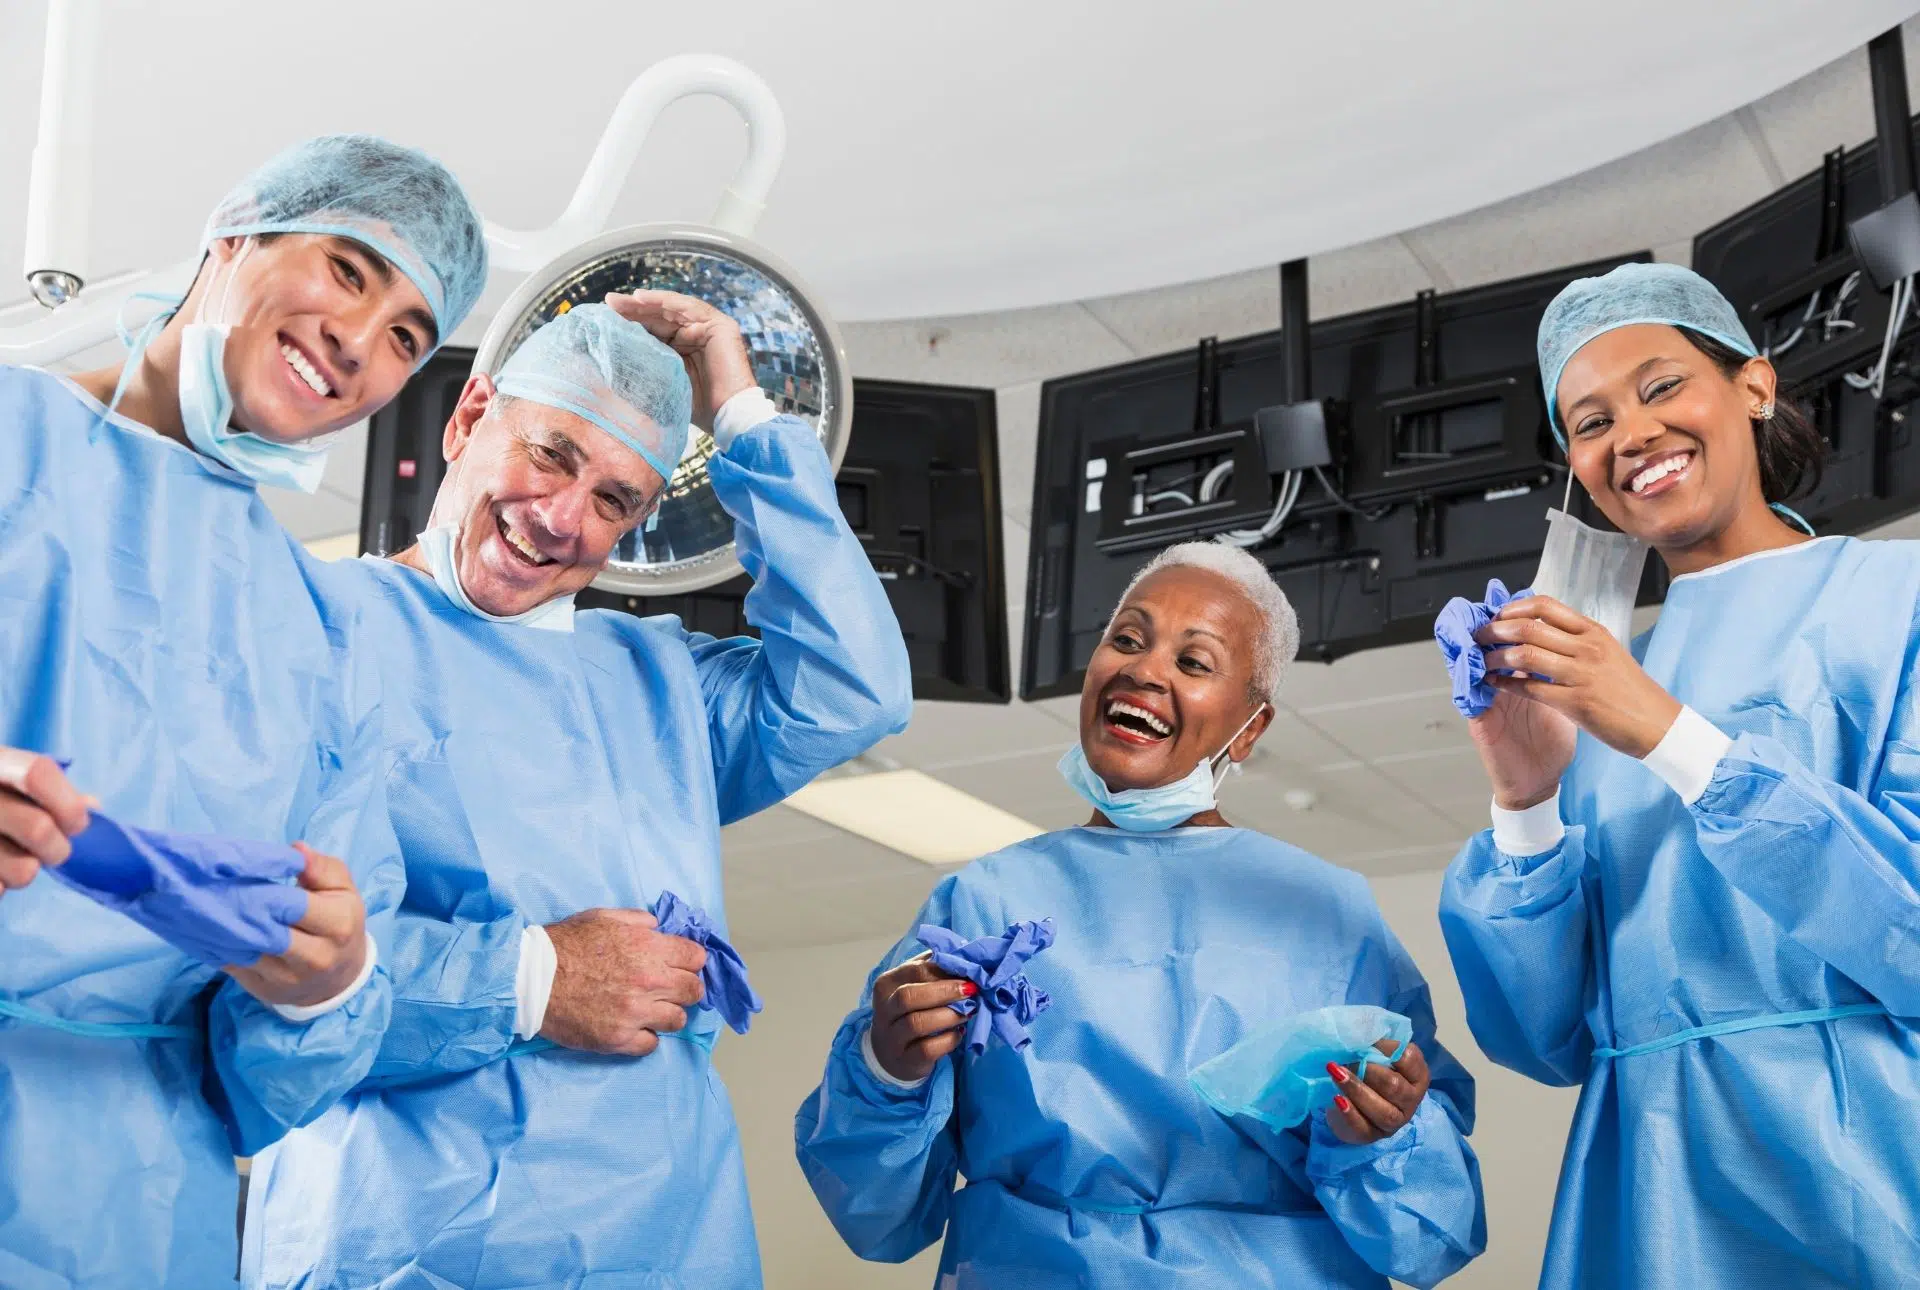 A group of cataract surgeons smiling because cataract surgery does not hurt